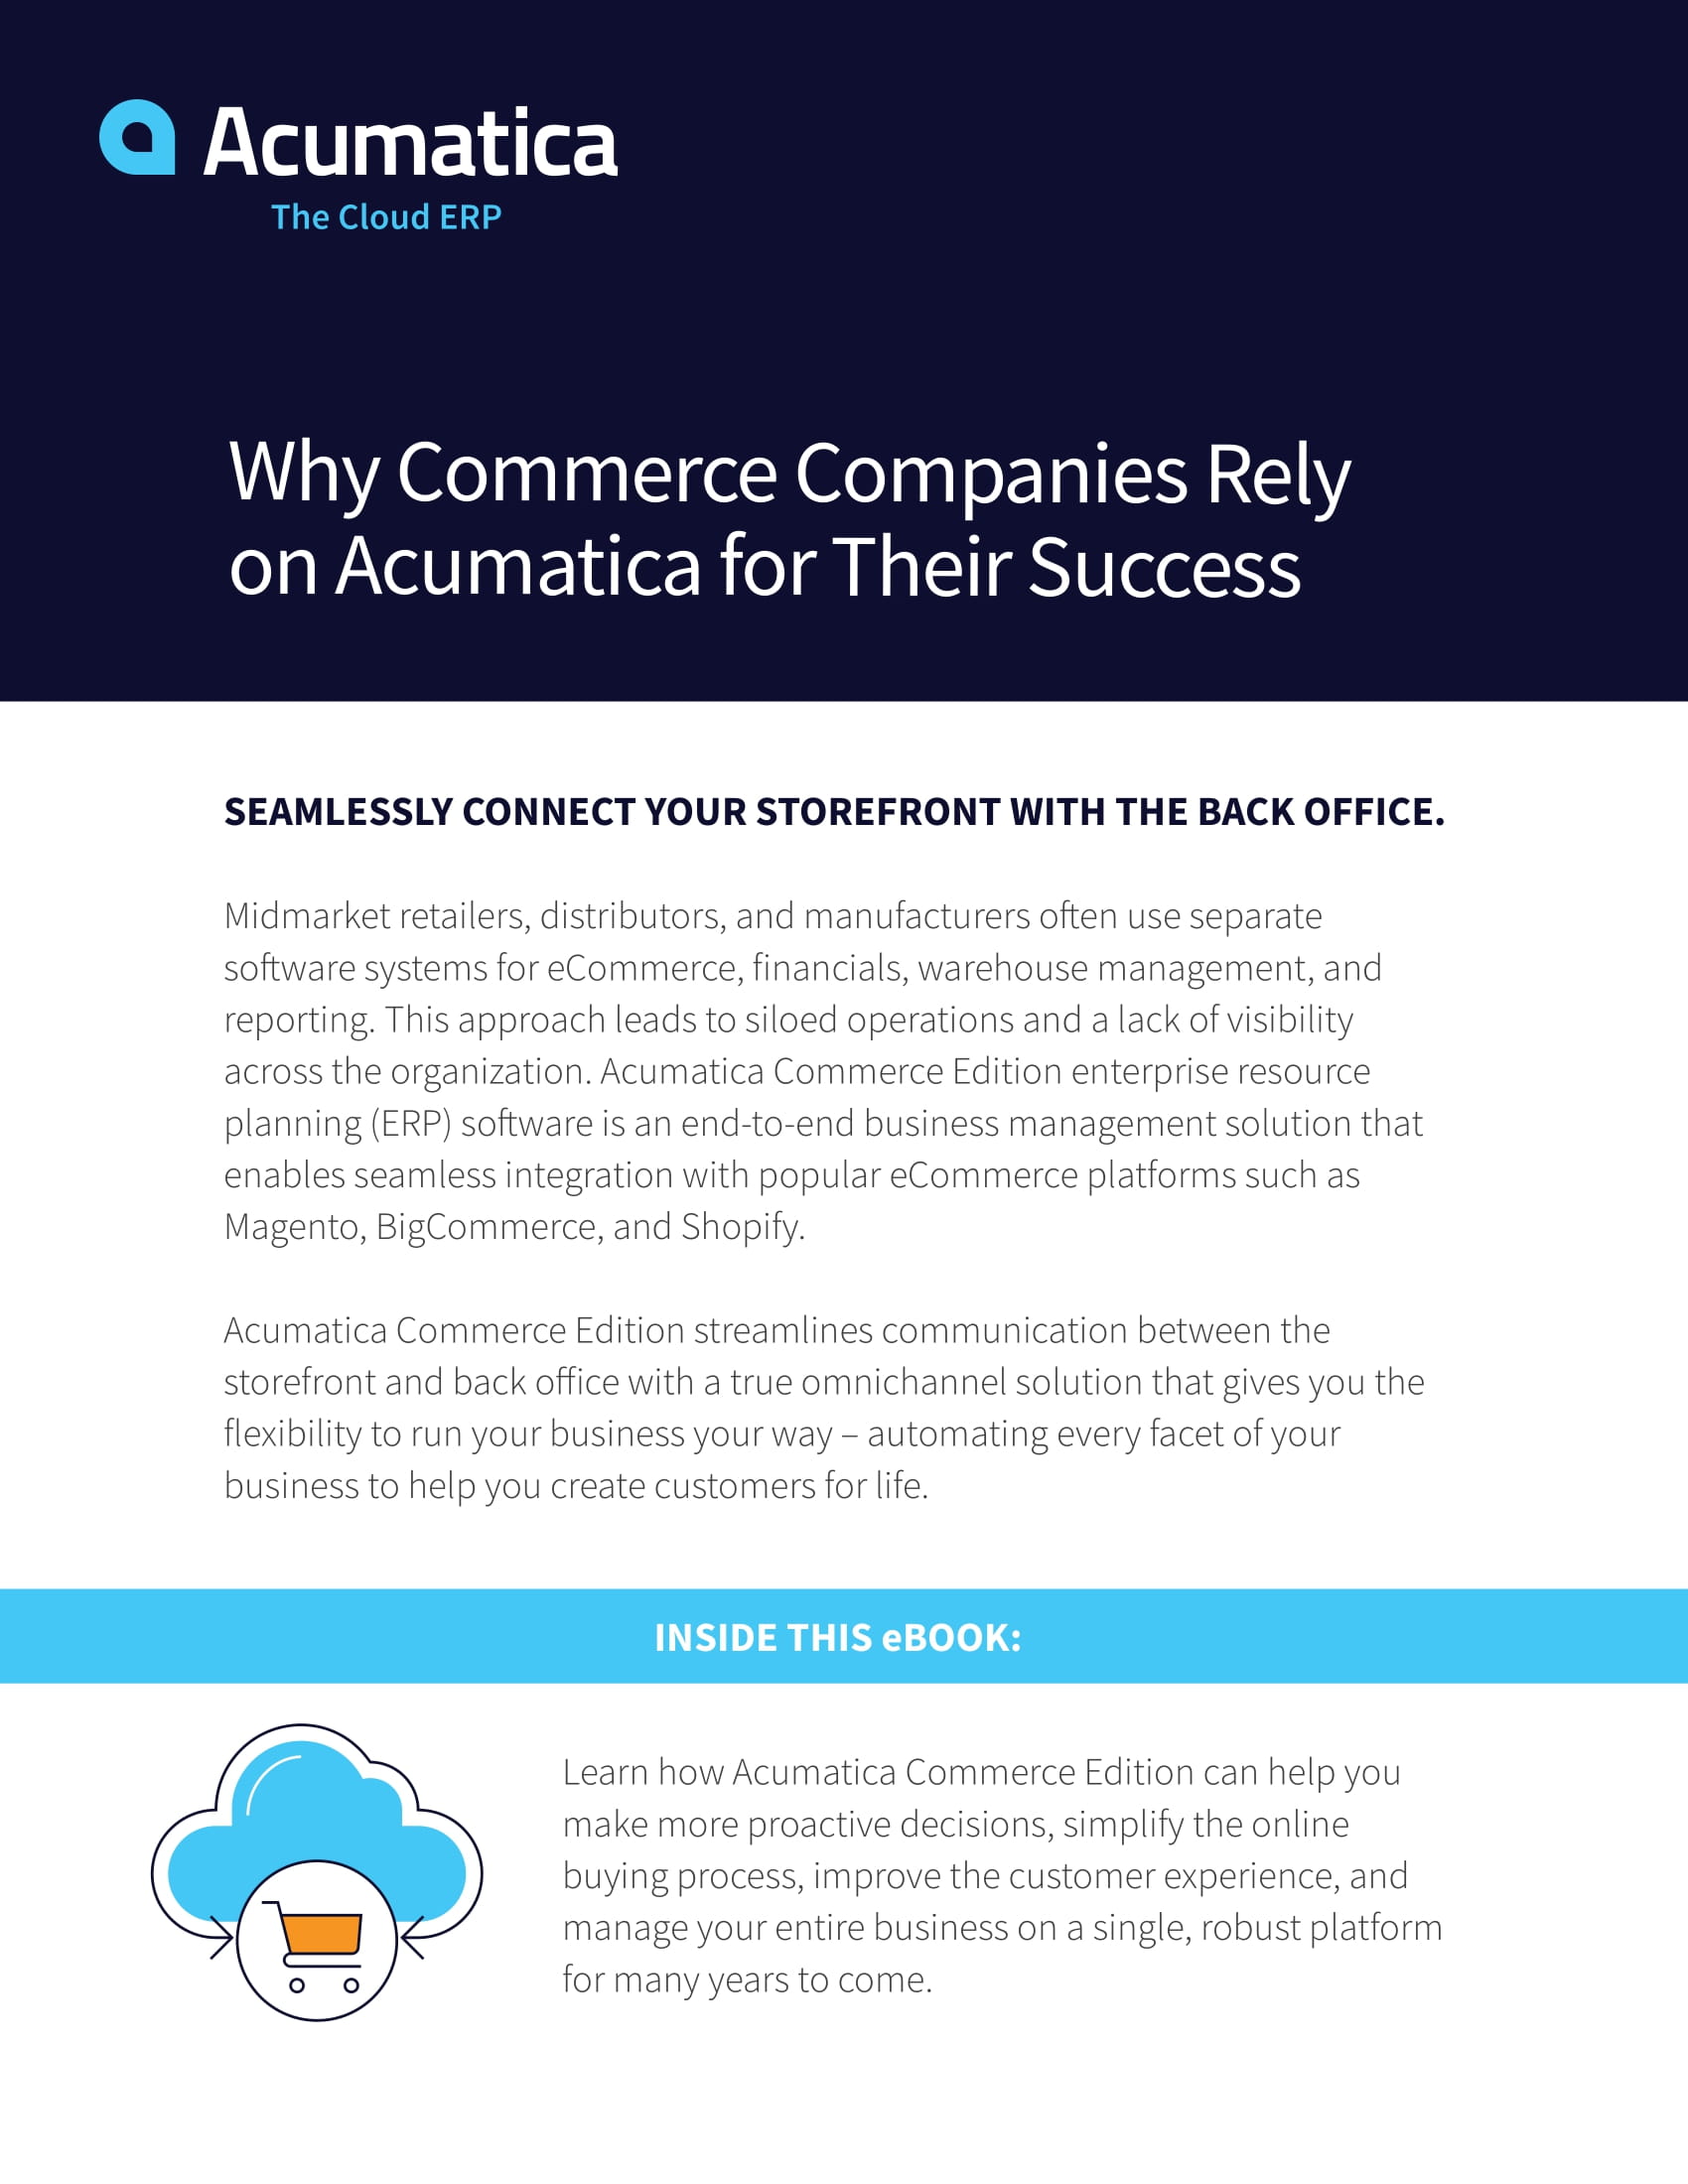 How Can the Acumatica eCommerce Platform Help Your Online Business Grow? 